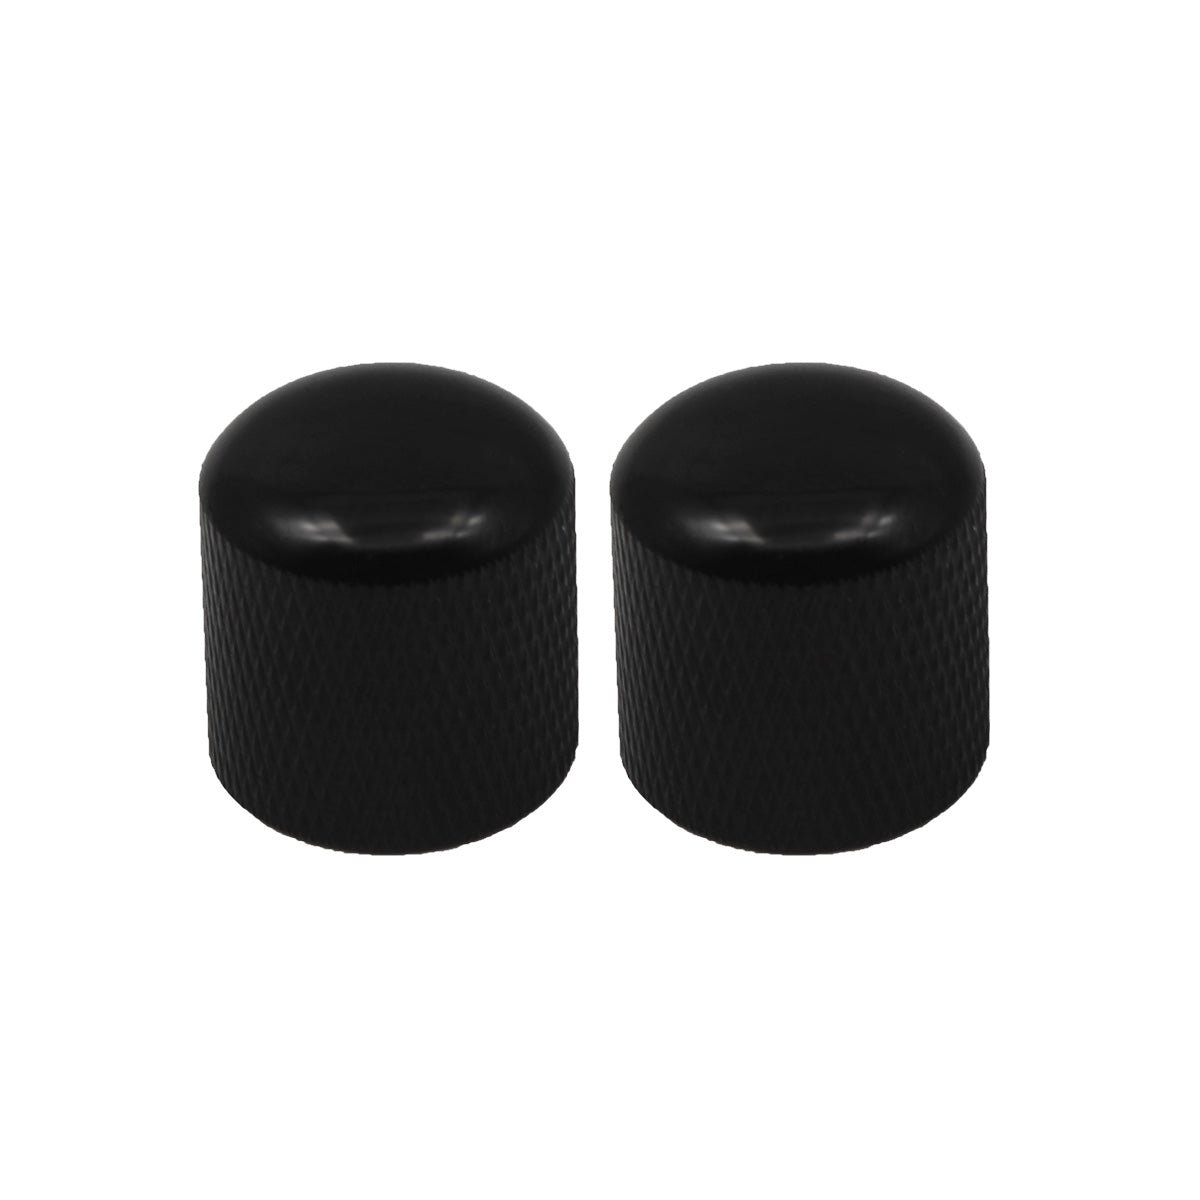 FLEOR Metal Guitar Knobs 18 x19mm For Electric Guitar Bass Parts